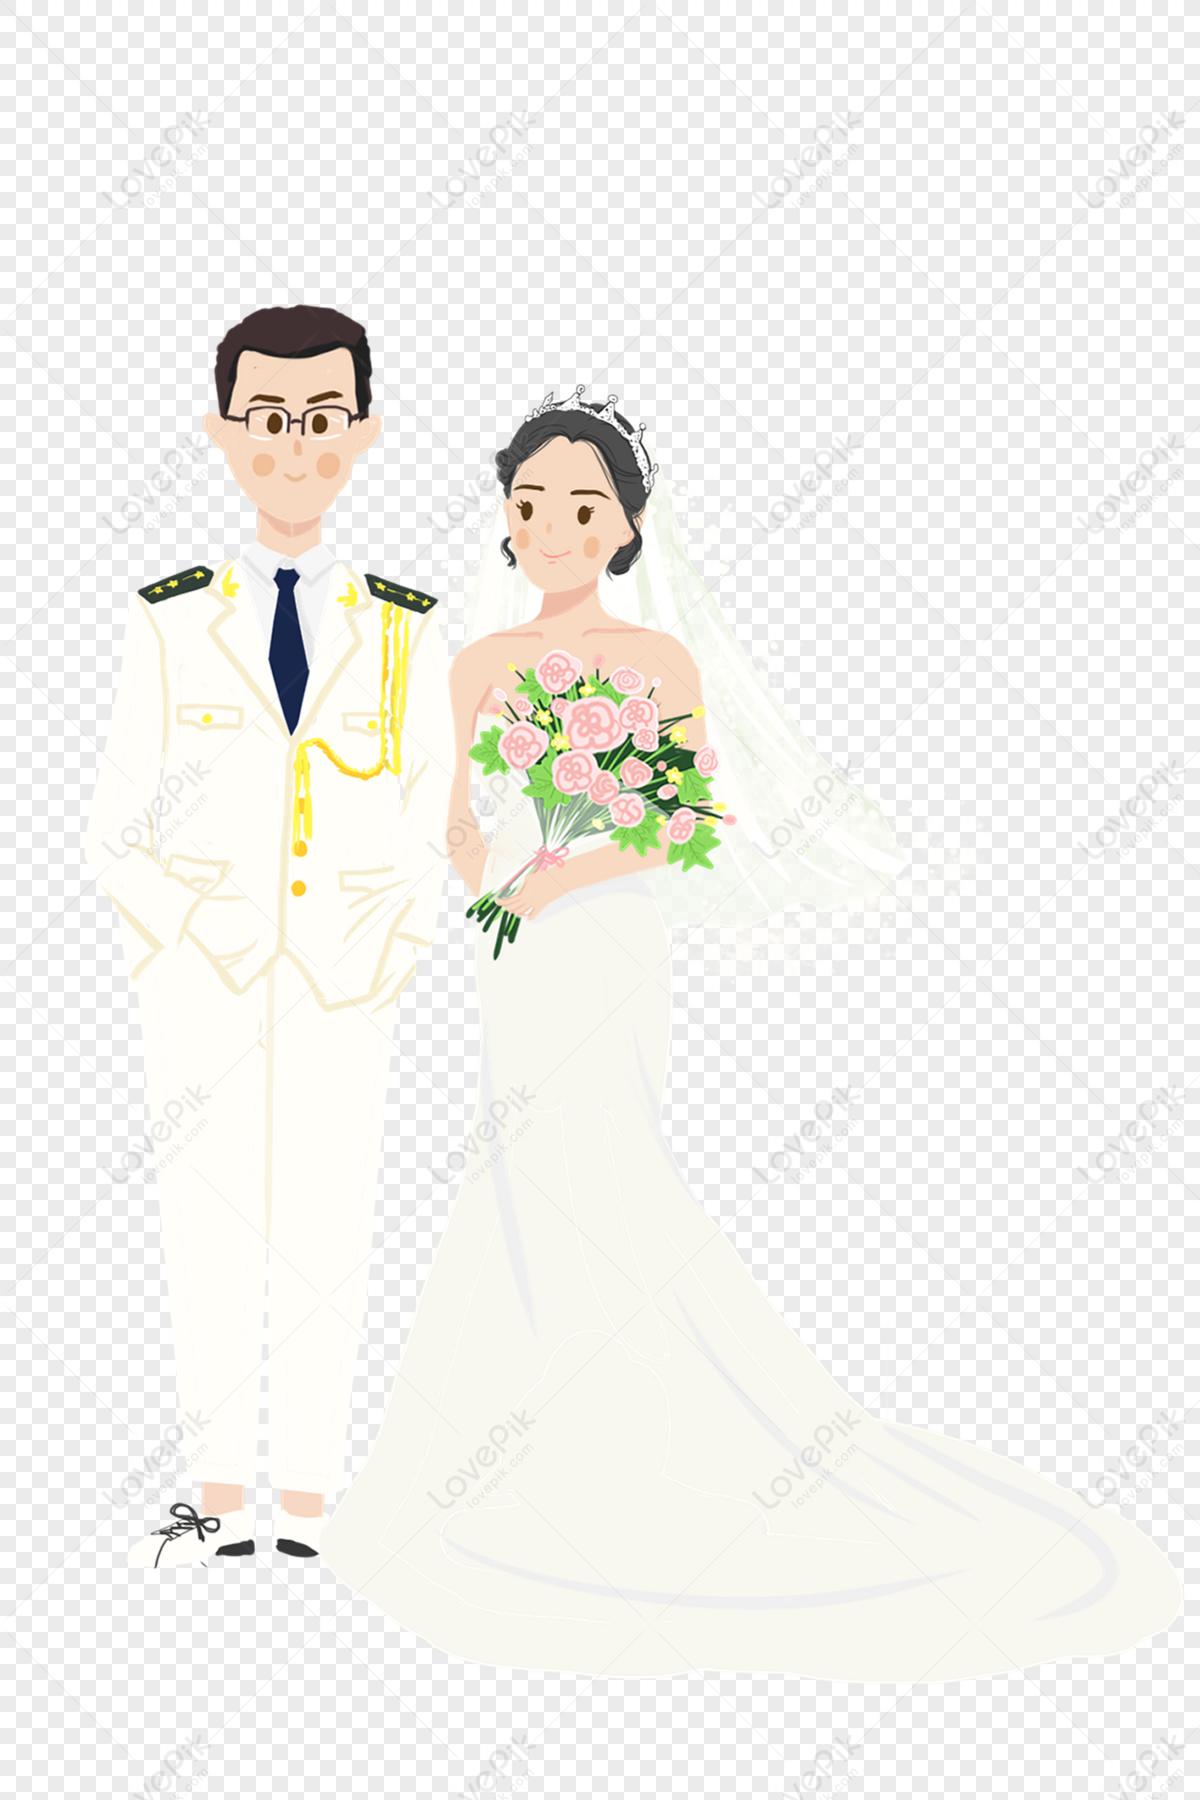 Wedding Cartoon Characters PNG Transparent Image And Clipart Image For Free  Download - Lovepik | 400994127